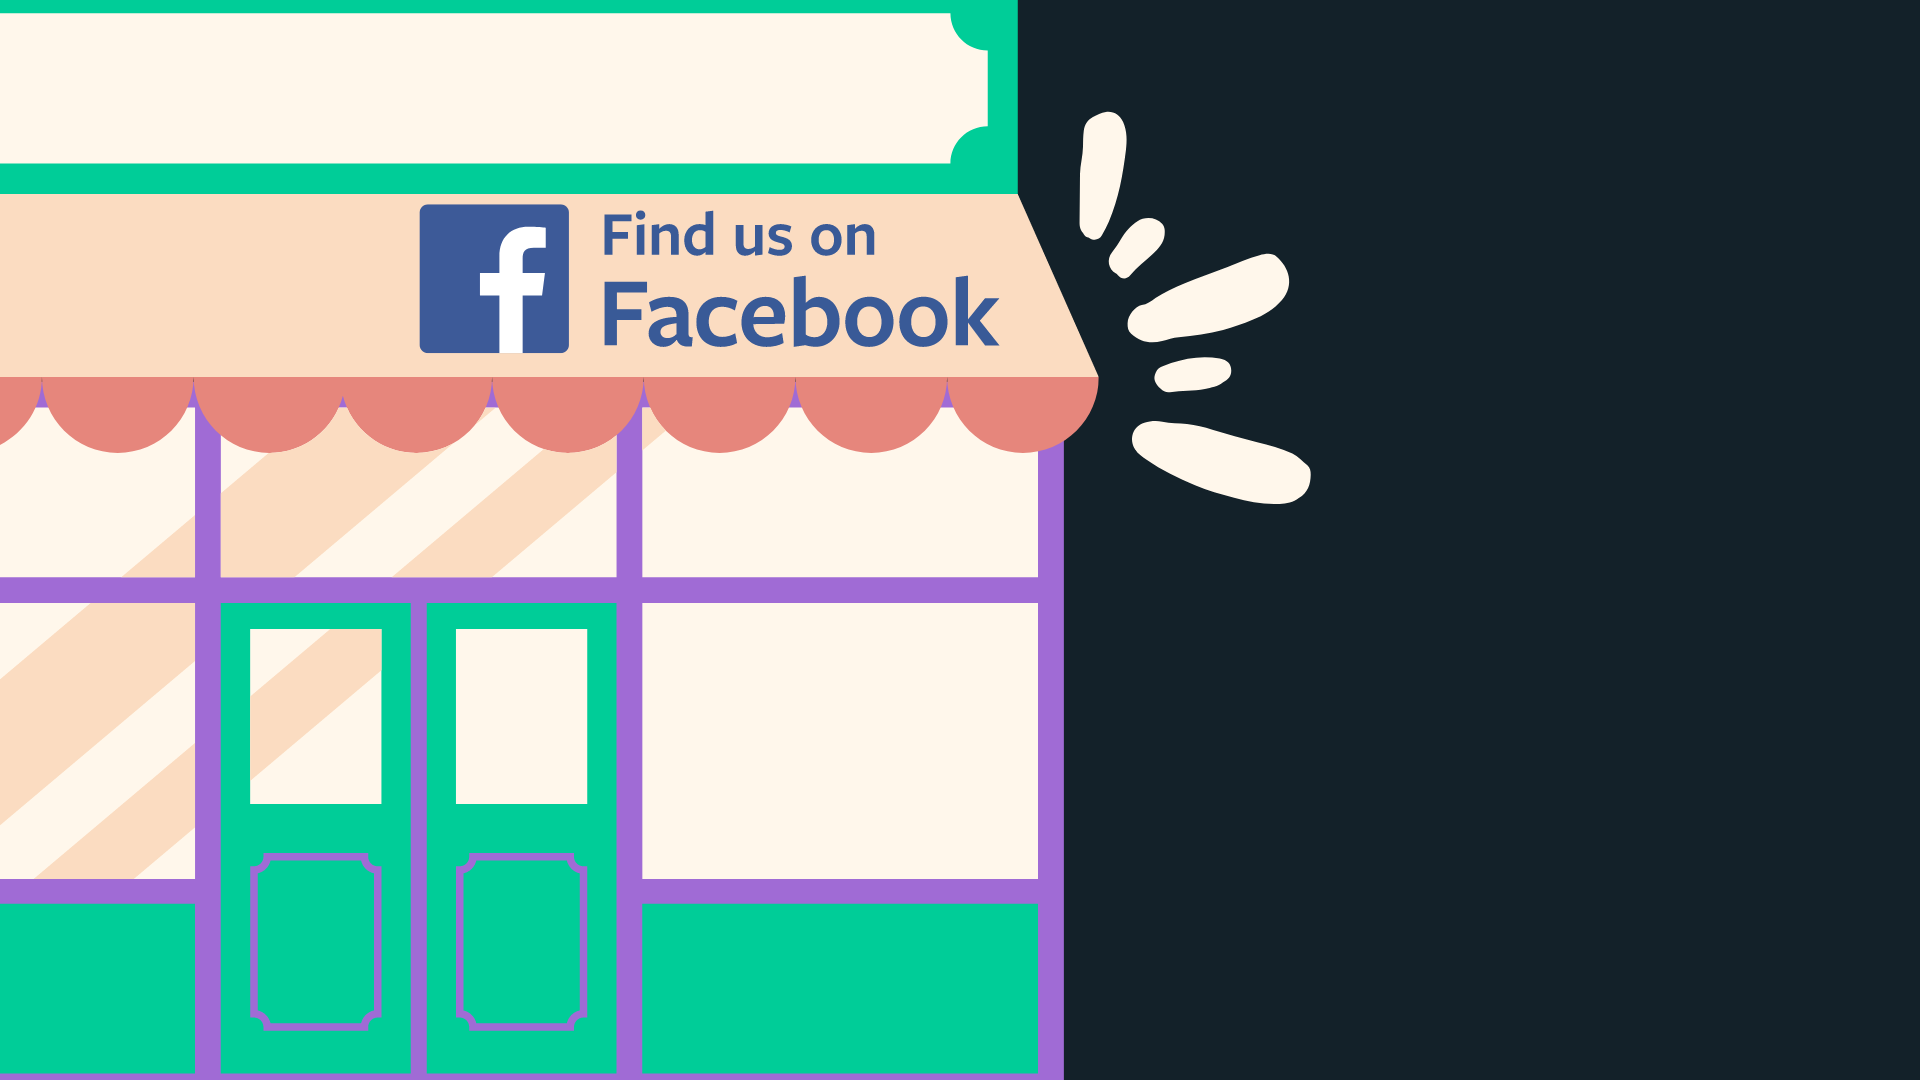 Facebook store page for local businesses